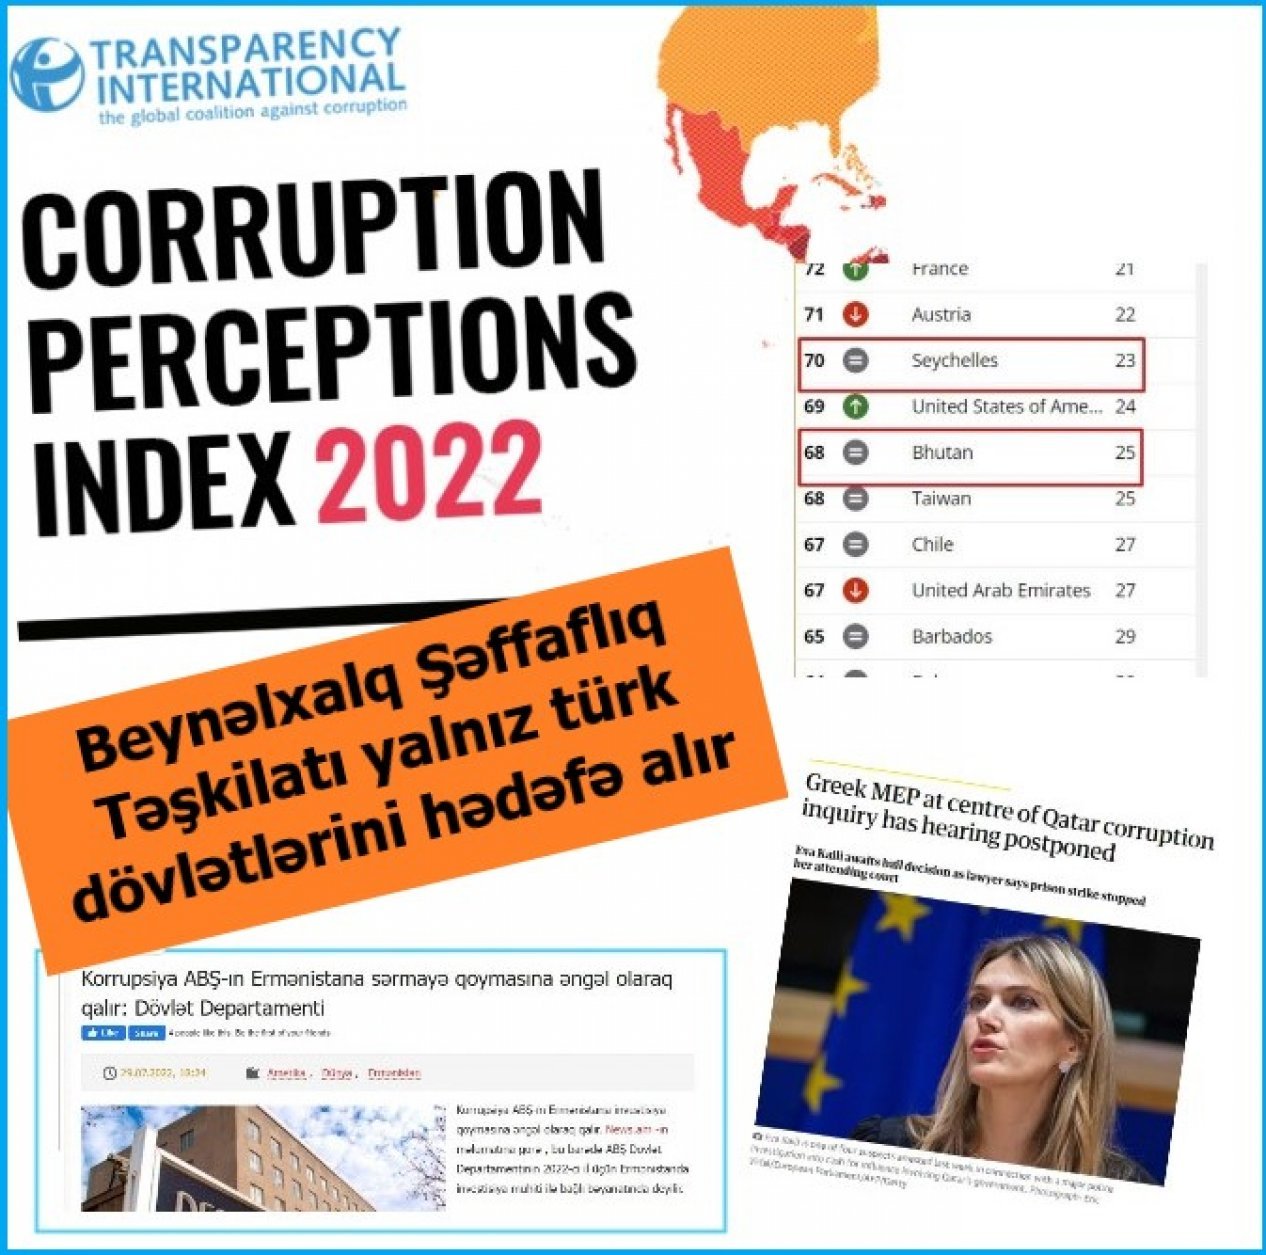 Transparency International targets only Turkic states?